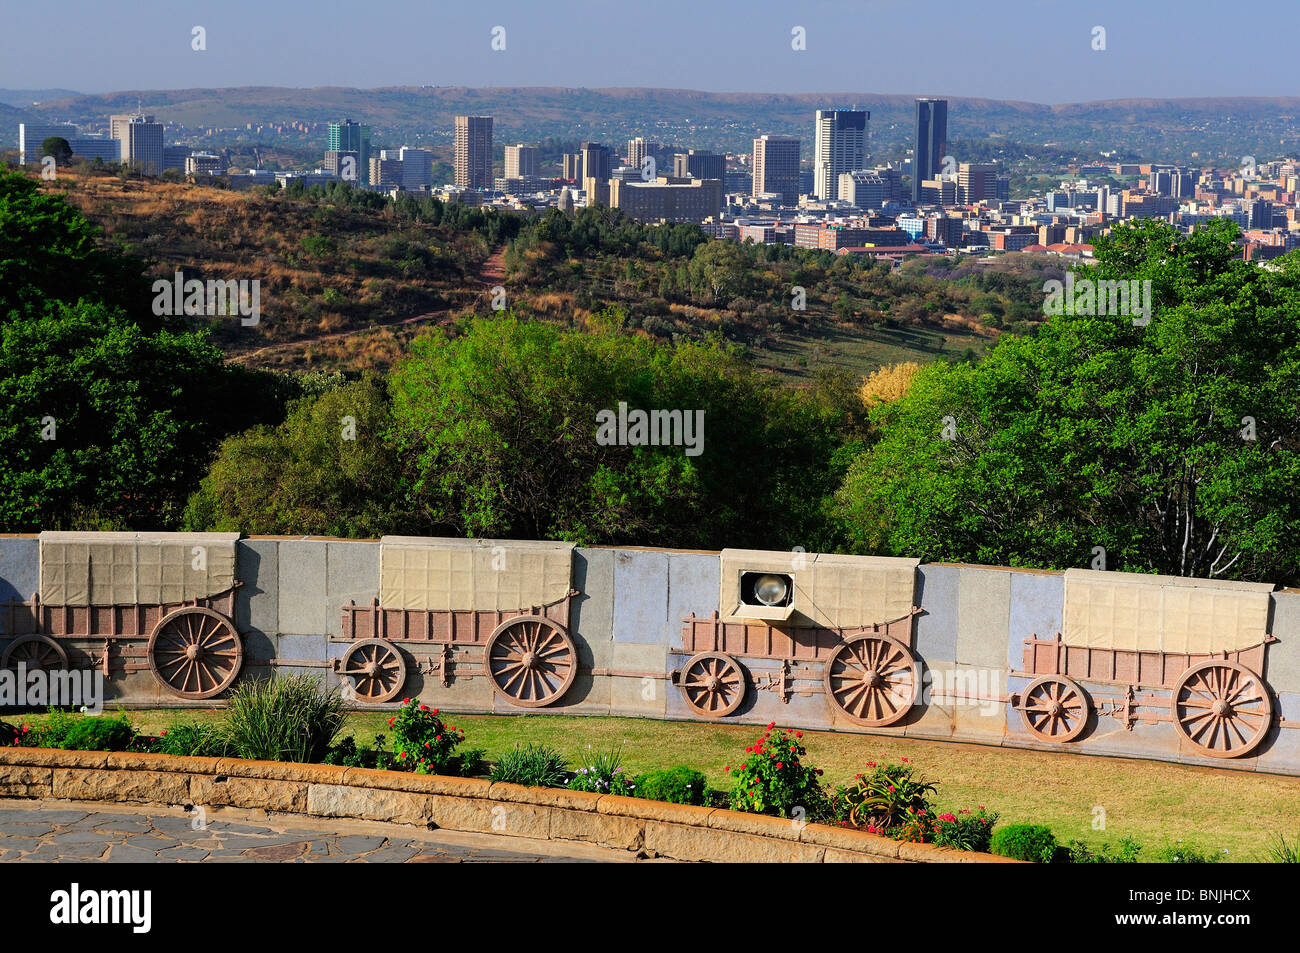 Voortrekker Monument Pretoria city Gauteng South Africa Boer history building wagons waggons wall Stock Photo